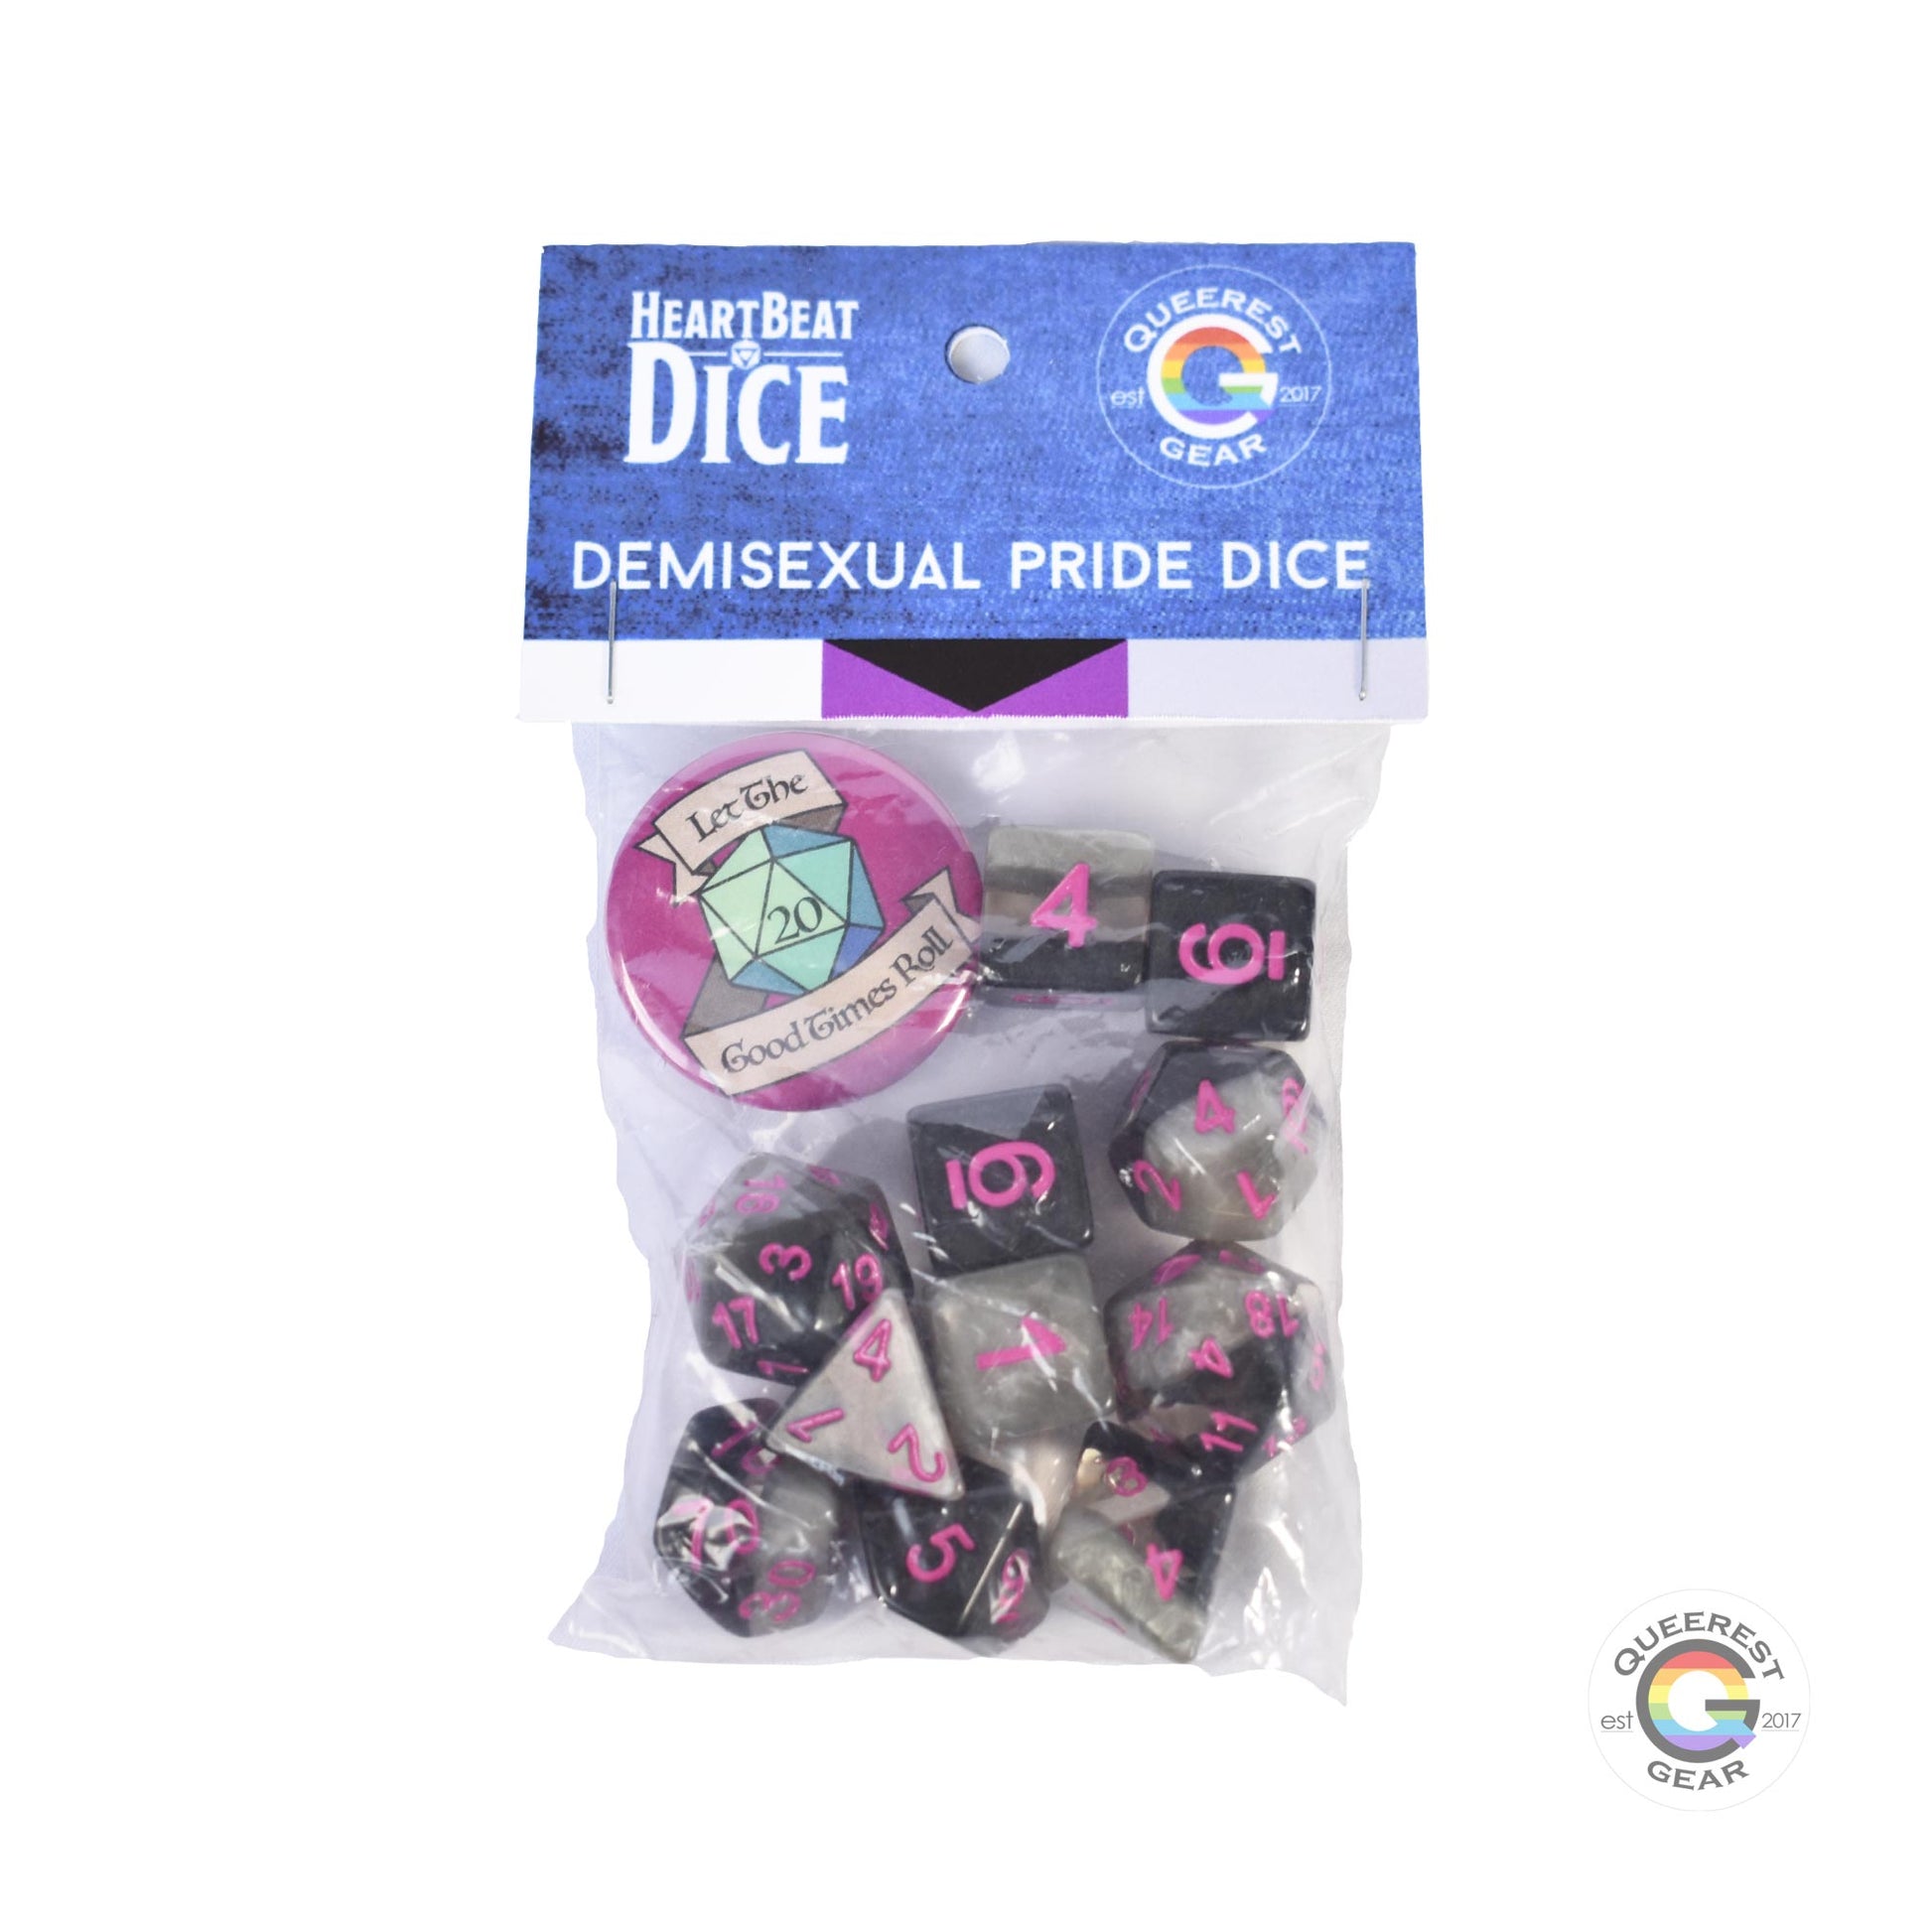 Demisexual pride dice in their packaging with a free “let the good times roll” button